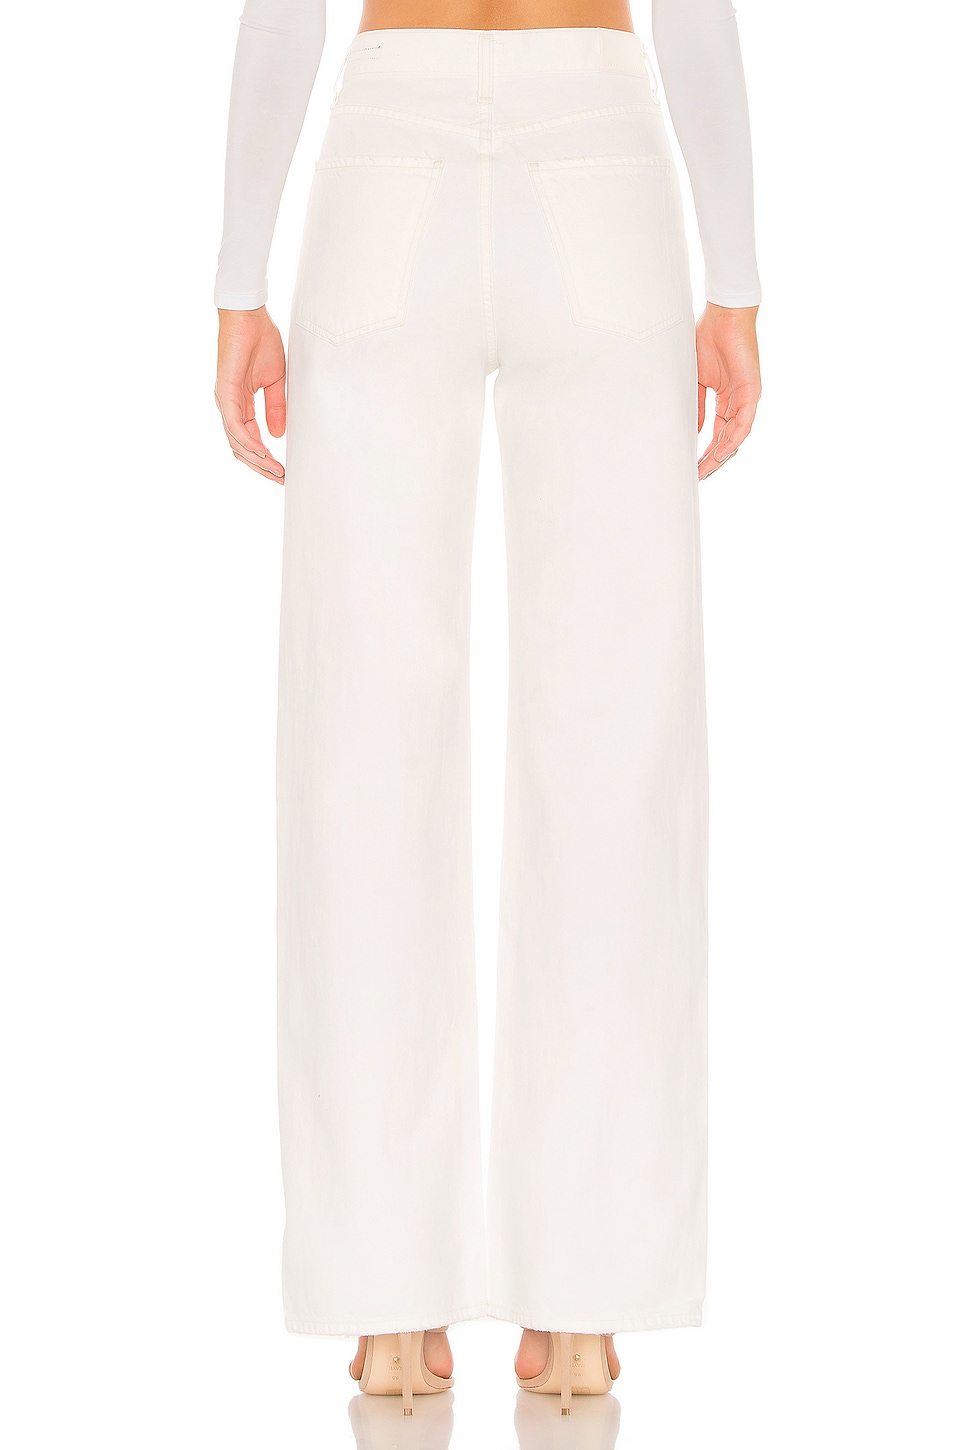 Shop Citizens Of Humanity Annina Trouser Jean.